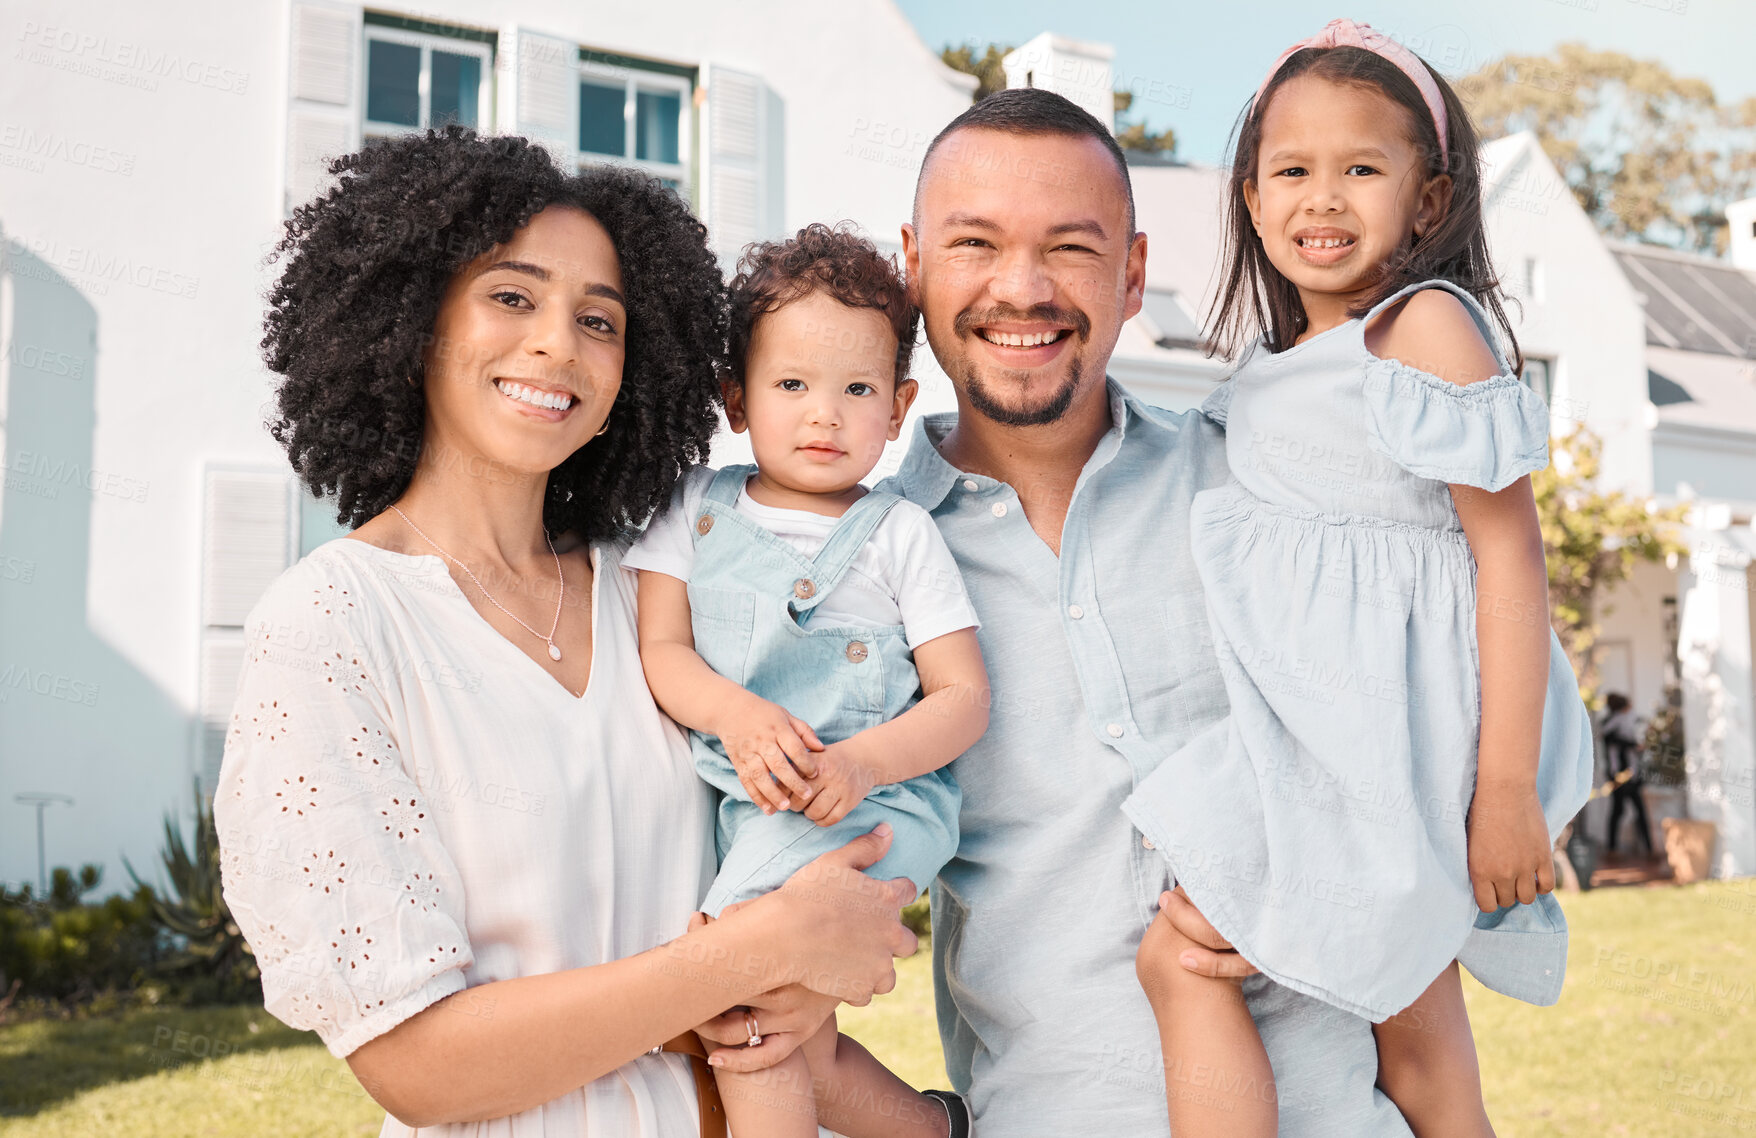 Buy stock photo Father, mother or portrait of children in new home or real estate with a happy family with love or care. Dream house, excited or young kids with proud dad, mom or smile on property after relocation